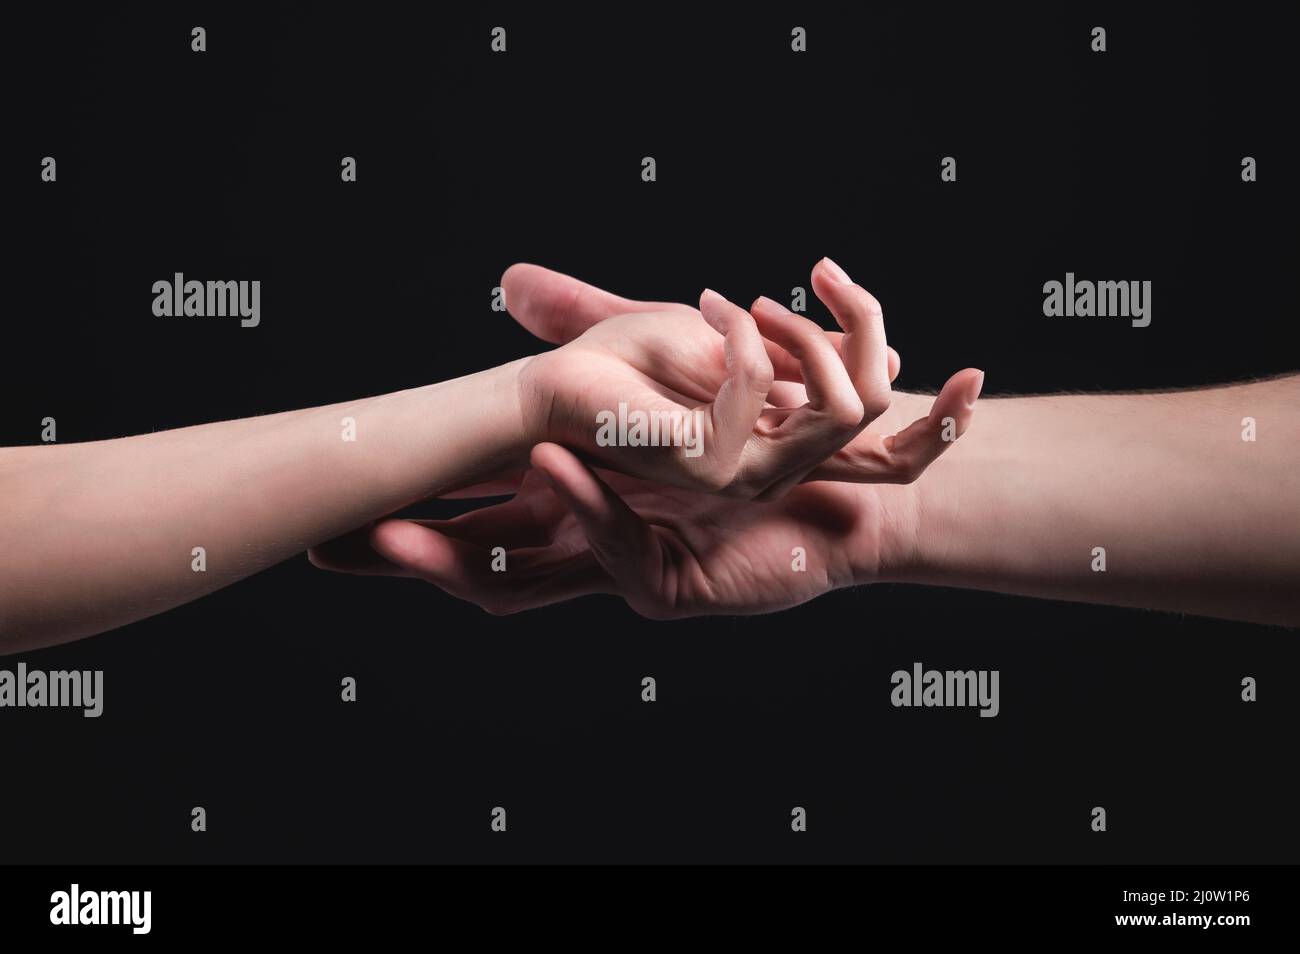 A close-up of two hands male and female gently touch each other. The concept tremulous rejection between the sexes Stock Photo